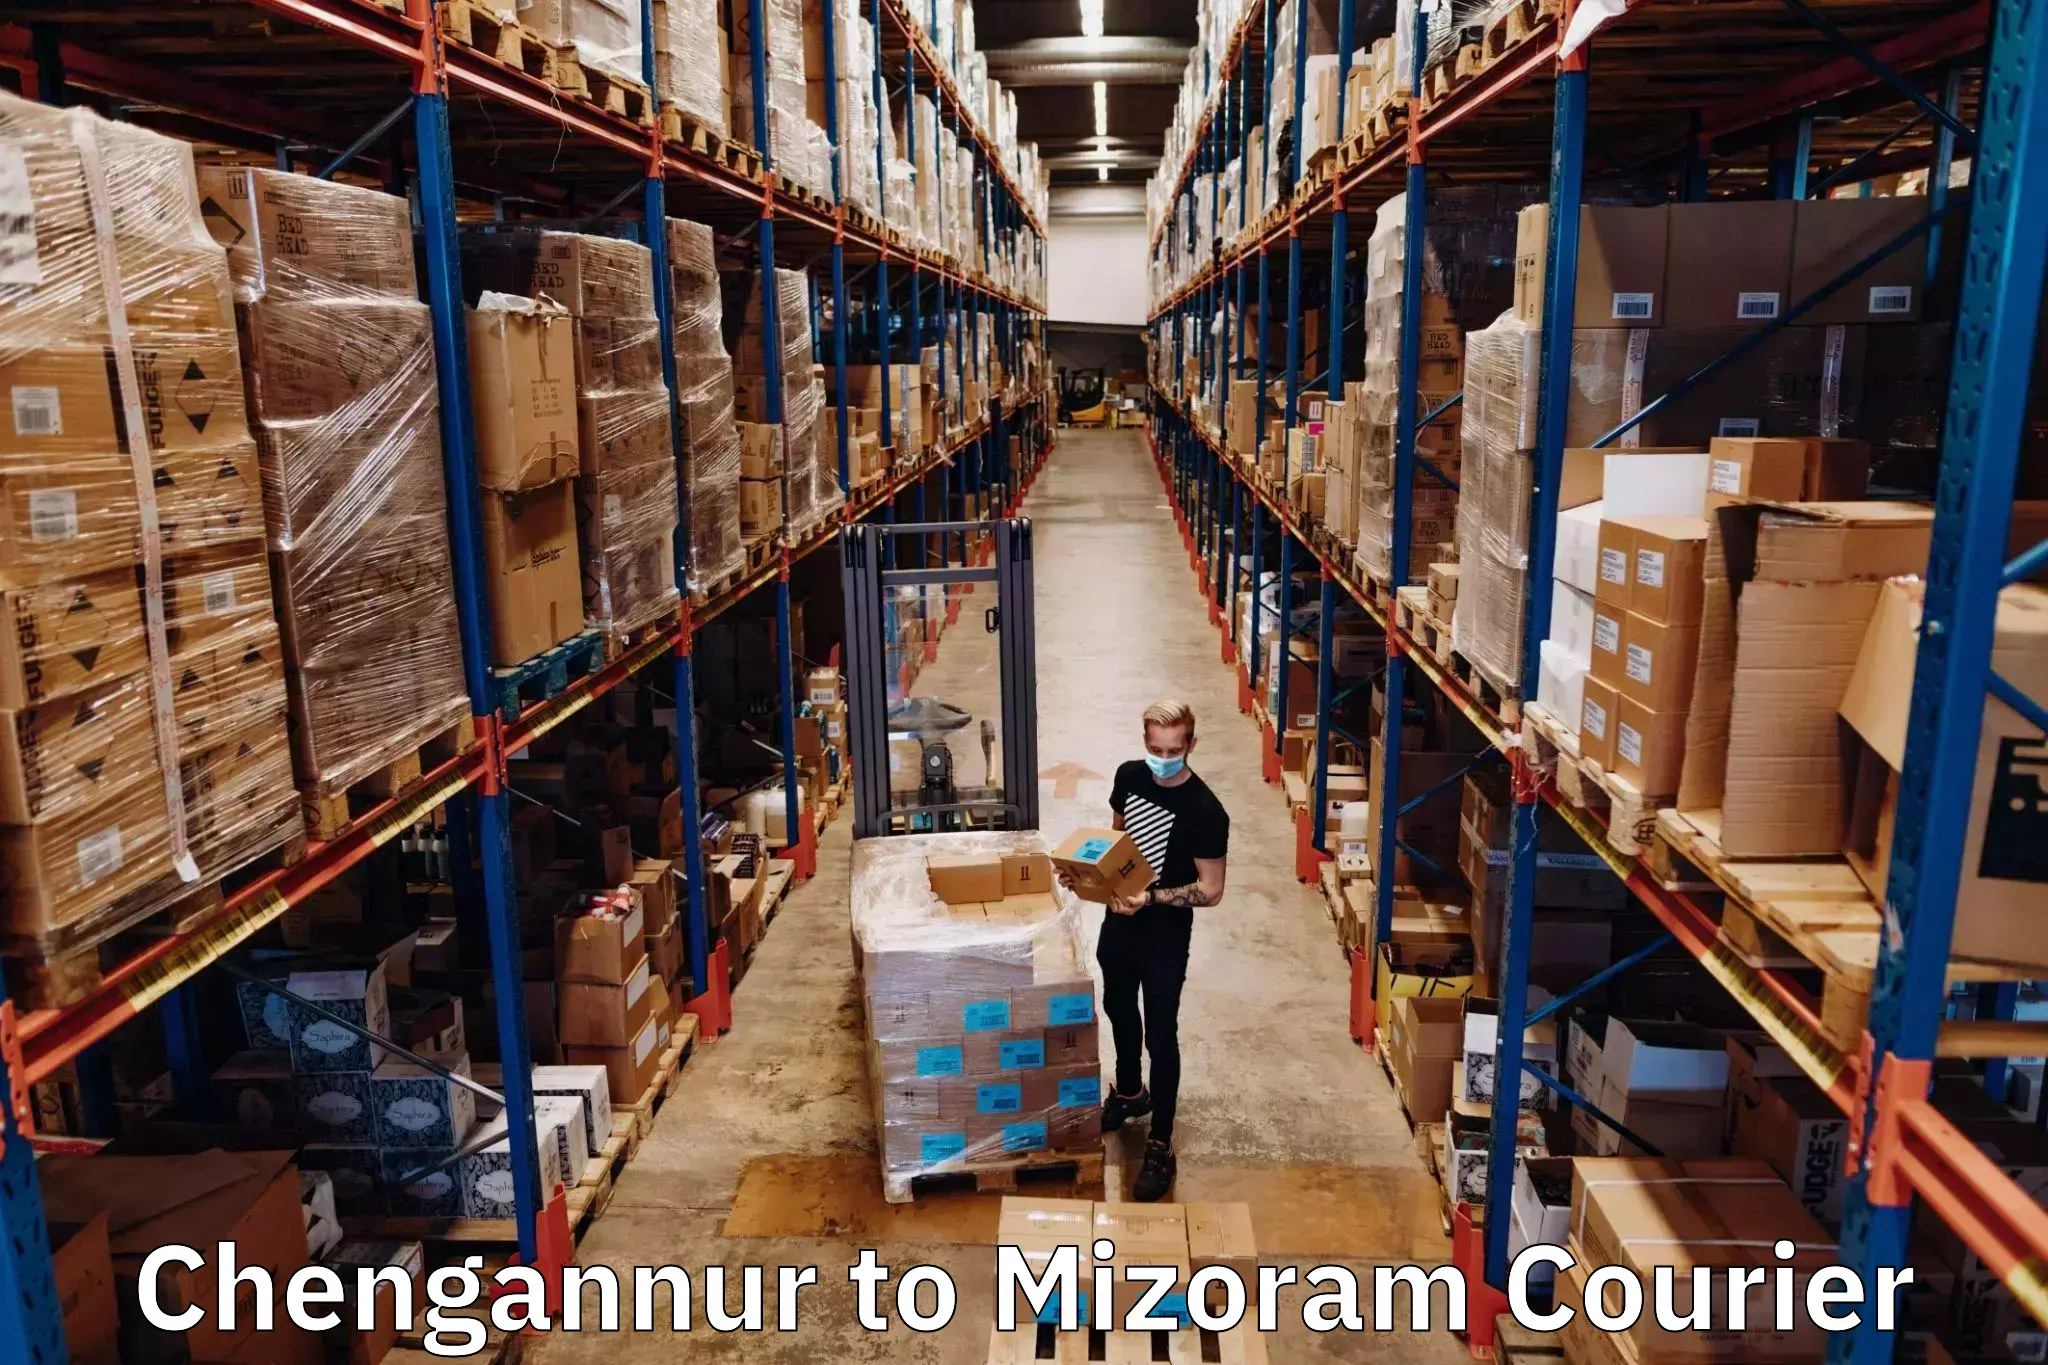 State-of-the-art courier technology Chengannur to Mizoram